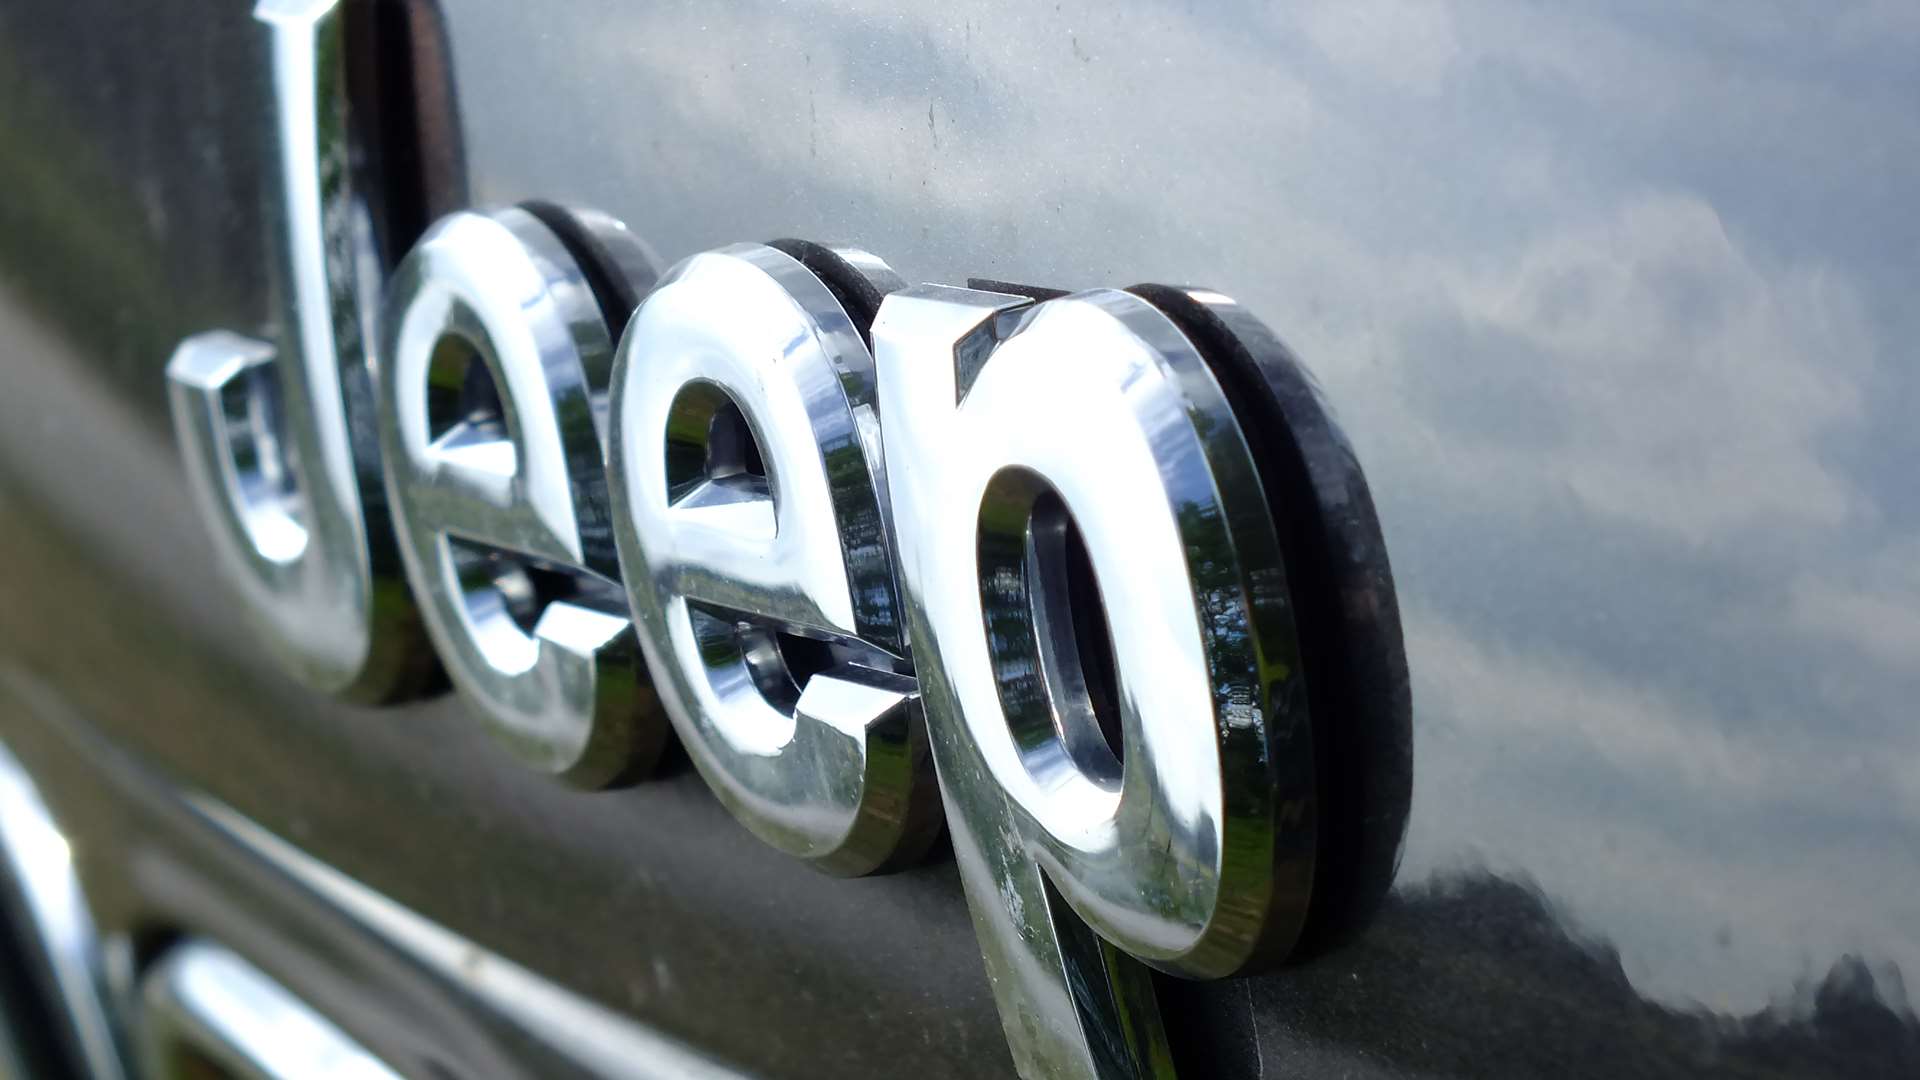 The Jeep name is steeped in history